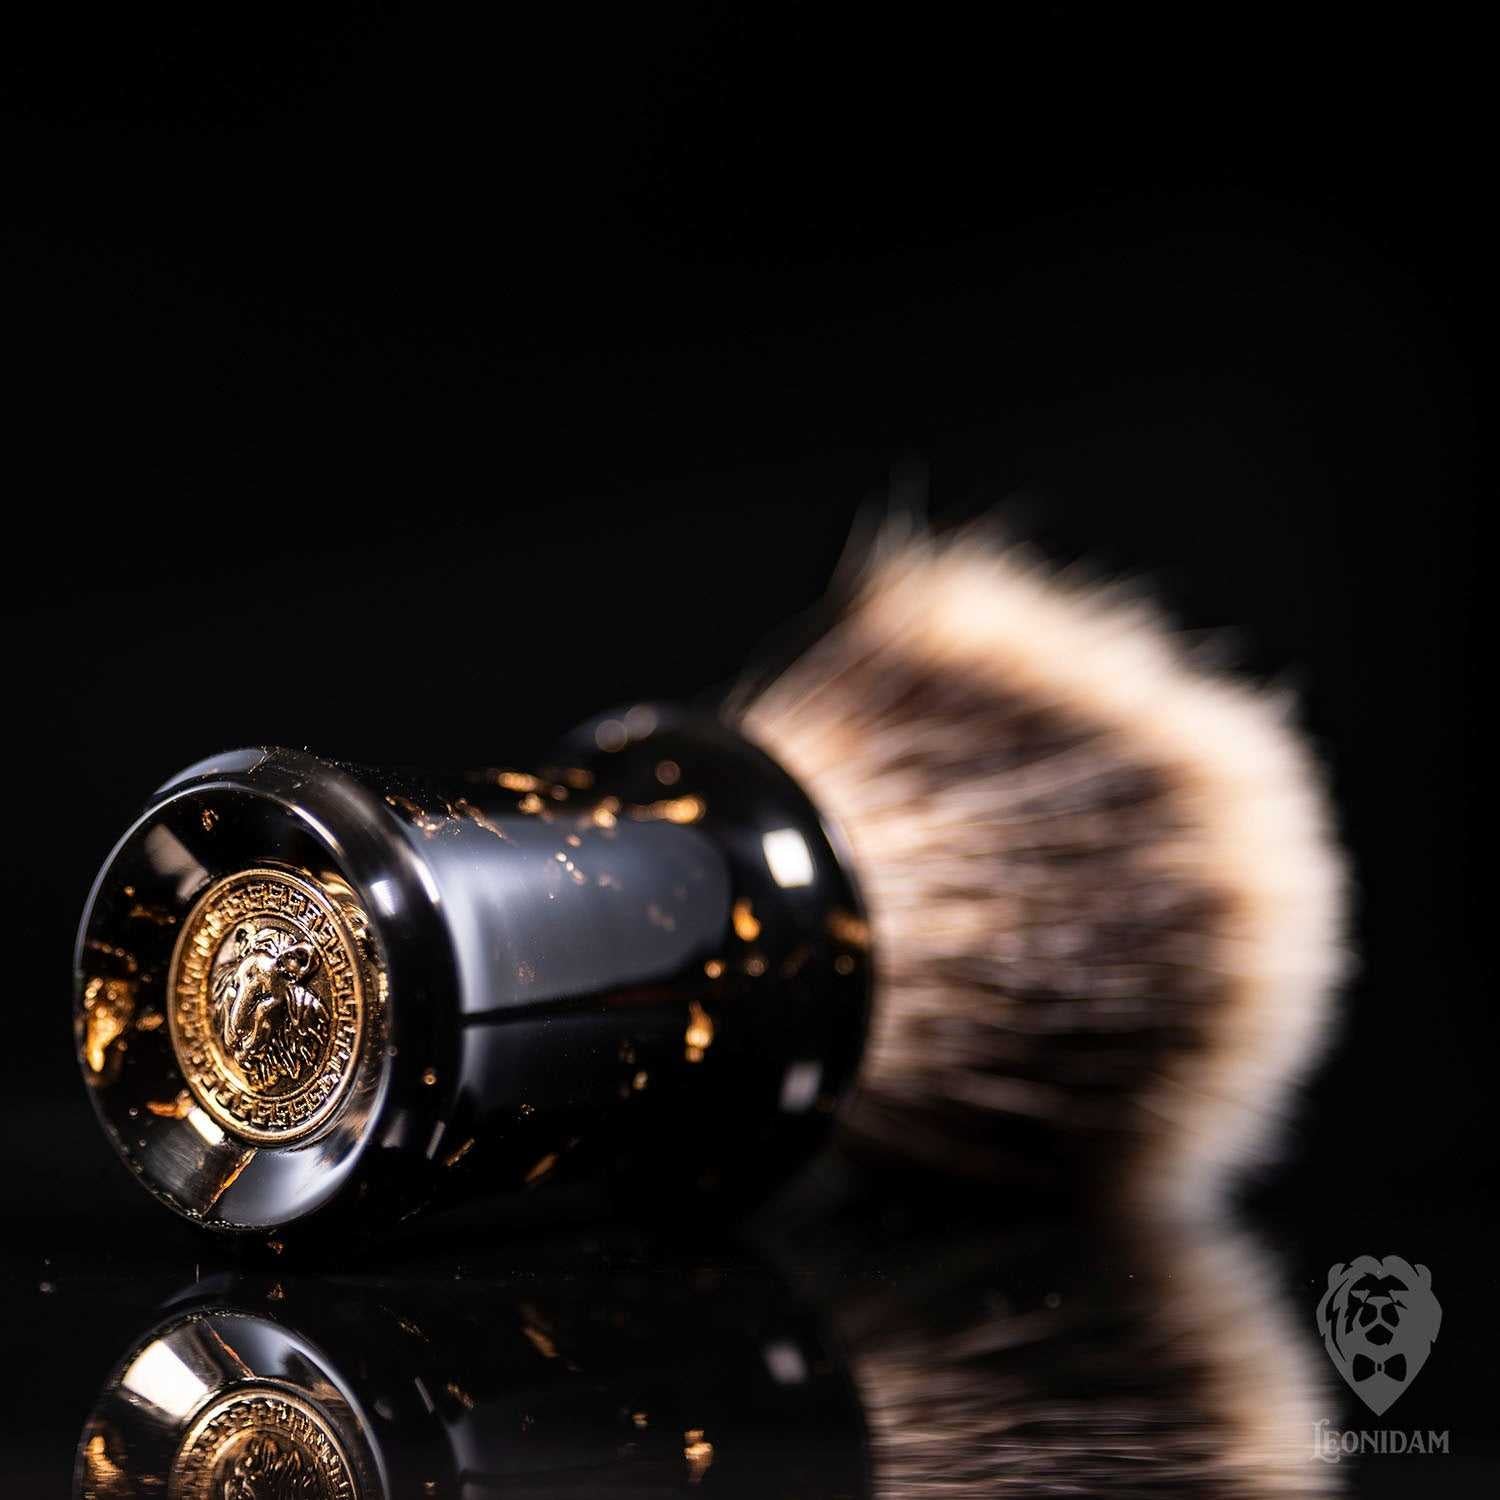 Handmade Shaving Brush "Cassius" in polished black resin with gold flakes